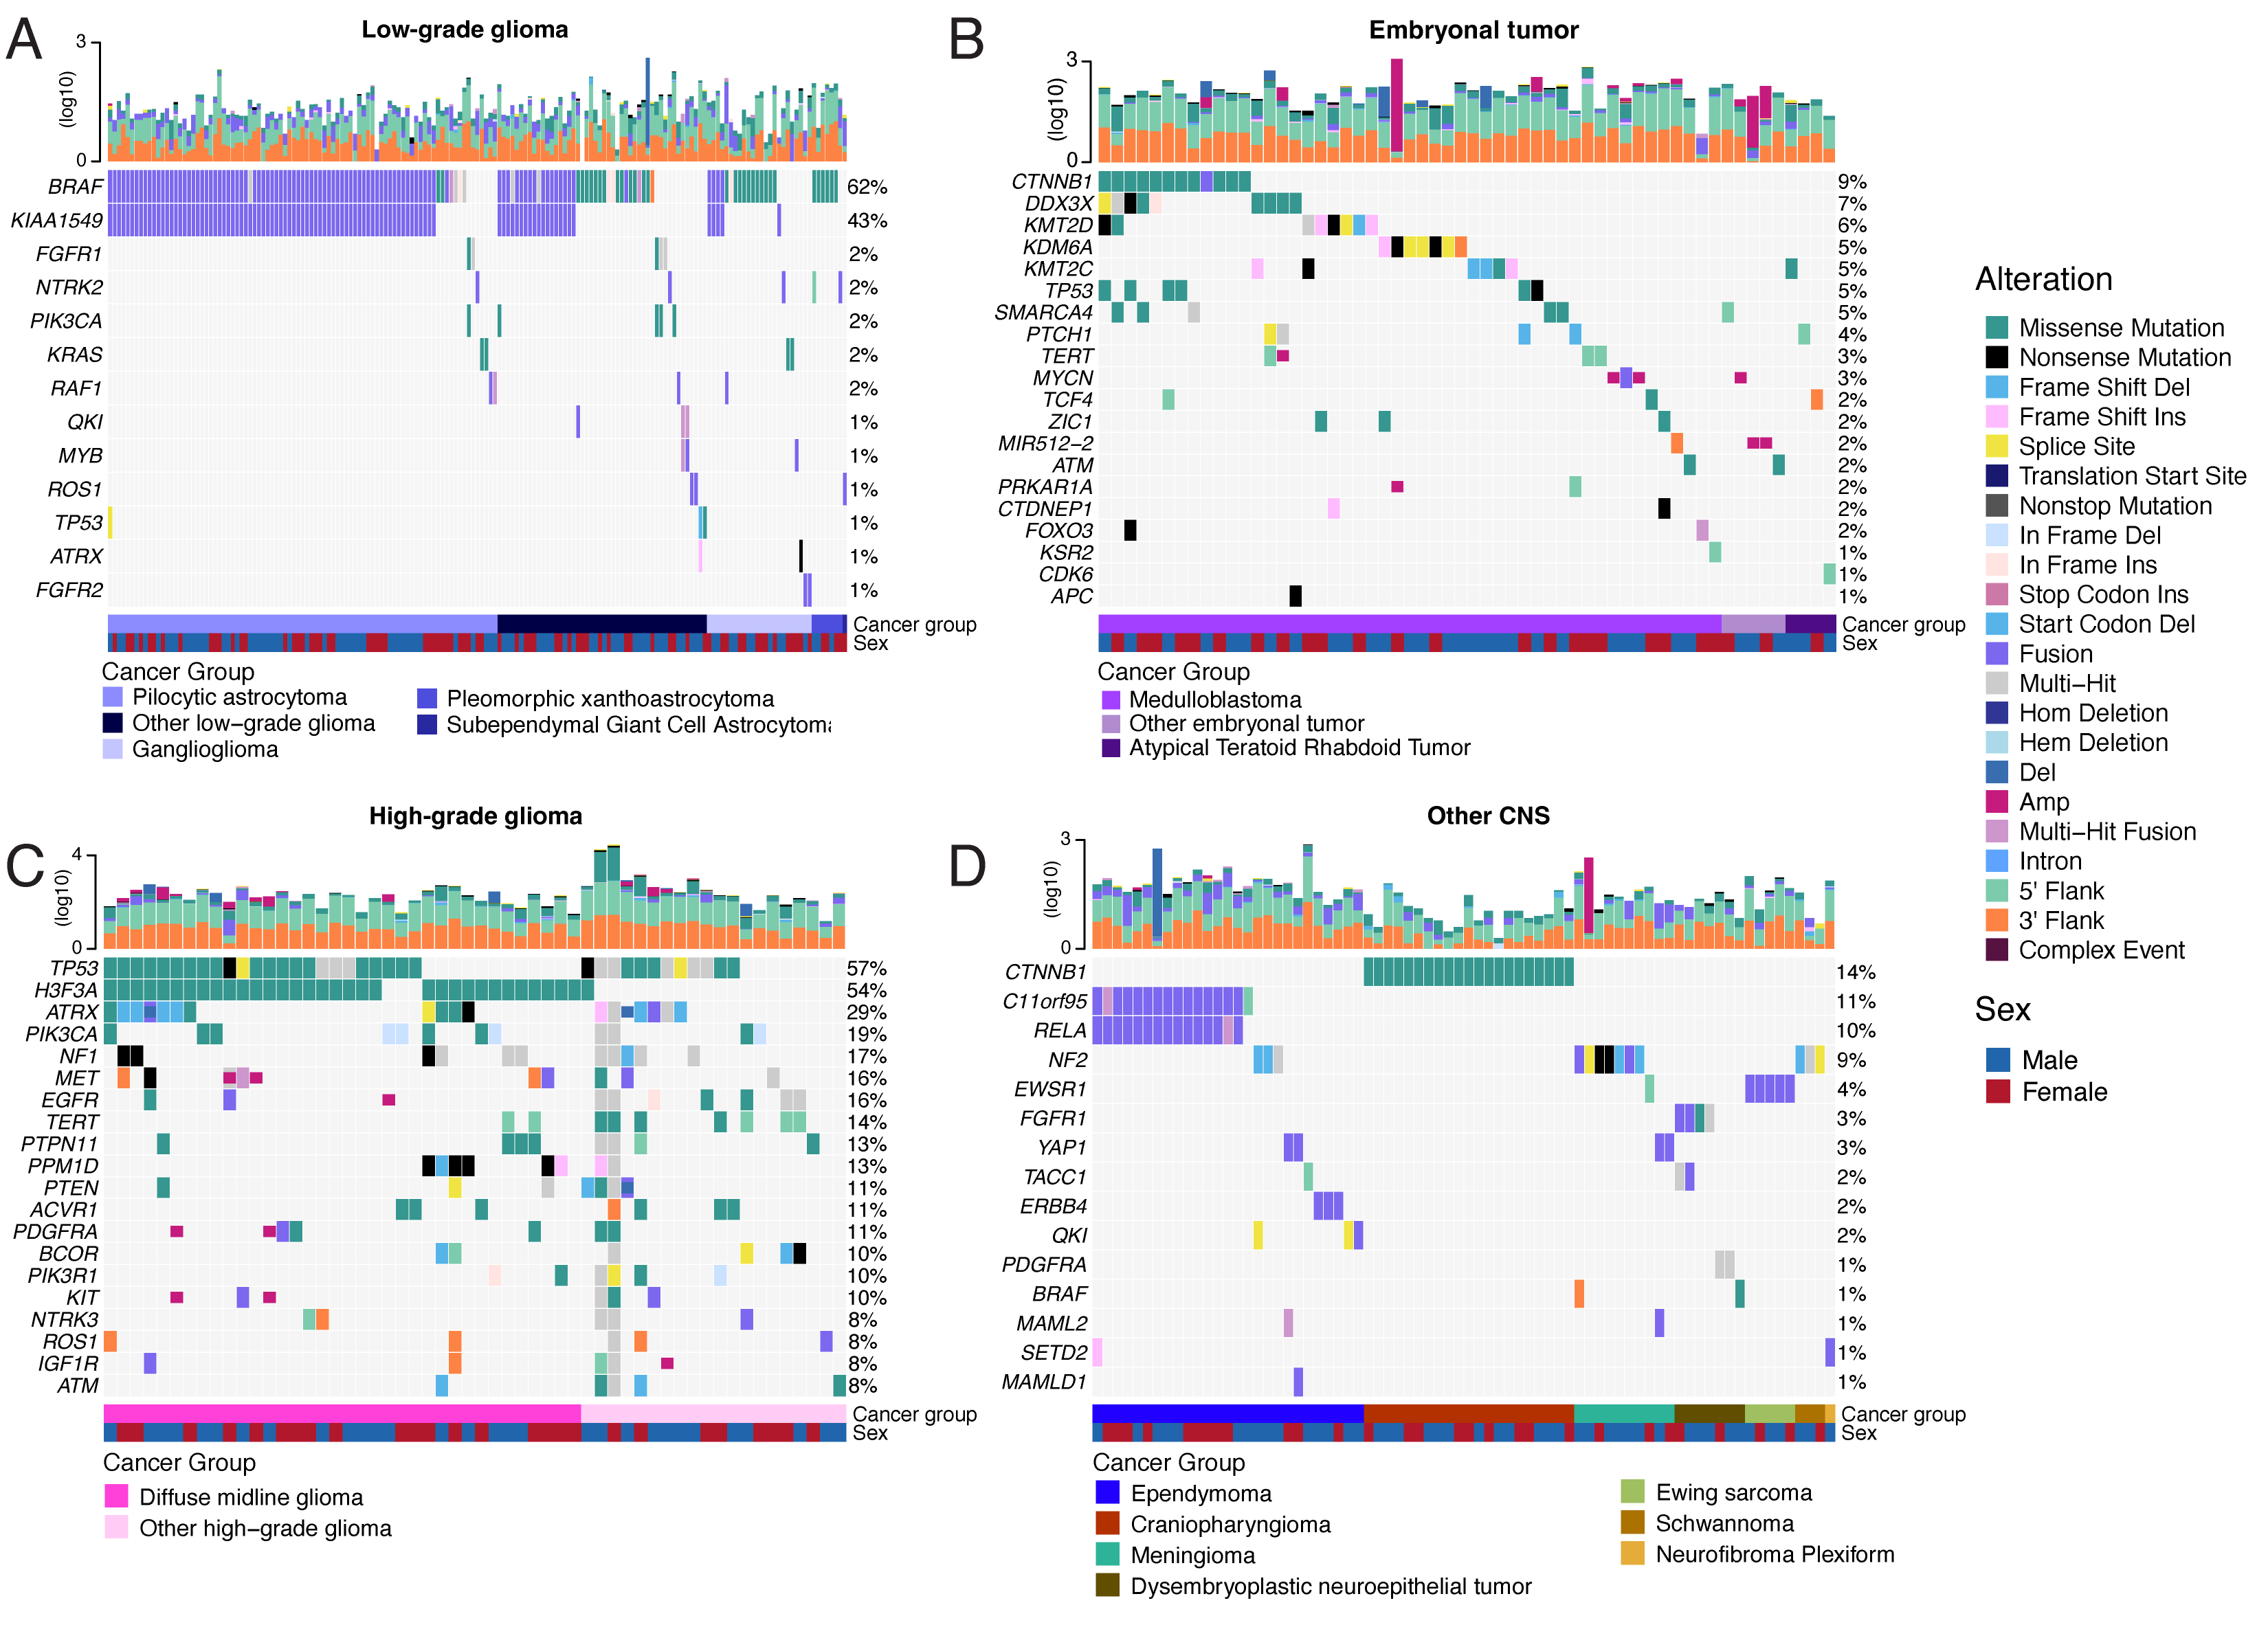 Figure 2: Mutational landscape of PBTA tumors. Frequencies of canonical somatic gene mutations, CNVs, fusions, and TMB (top bar plot) for the top mutated genes across primary tumors within the OpenPBTA dataset. A, LGGs (N = 226): pilocytic astrocytoma (N = 104), other LGG (N = 68), ganglioglioma (N = 35), pleomorphic xanthoastrocytoma (N = 9), subependymal giant cell astrocytoma (N = 10). B, Embryonal tumors (N = 129): medulloblastoma (N = 95), atypical teratoid rhabdoid tumor (N = 24), other embryonal tumor (N = 10). C, HGGs (N = 63): diffuse midline glioma (N = 36) and other HGG (N = 27). D, Other CNS tumors (N = 153): ependymoma (N = 60), craniopharyngioma (N = 31), meningioma (N = 17), dysembryoplastic neuroepithelial tumor (N = 19), Ewing sarcoma (N = 7), schwannoma (N = 12), and neurofibroma plexiform (N = 7). Rare CNS tumors are displayed in Figure S3B. Histology (Cancer Group) and sex annotations are displayed under each plot. Only tumors with mutations in the listed genes are shown. Multiple CNVs are denoted as a complex event. N denotes the number of unique tumors (one tumor per patient).